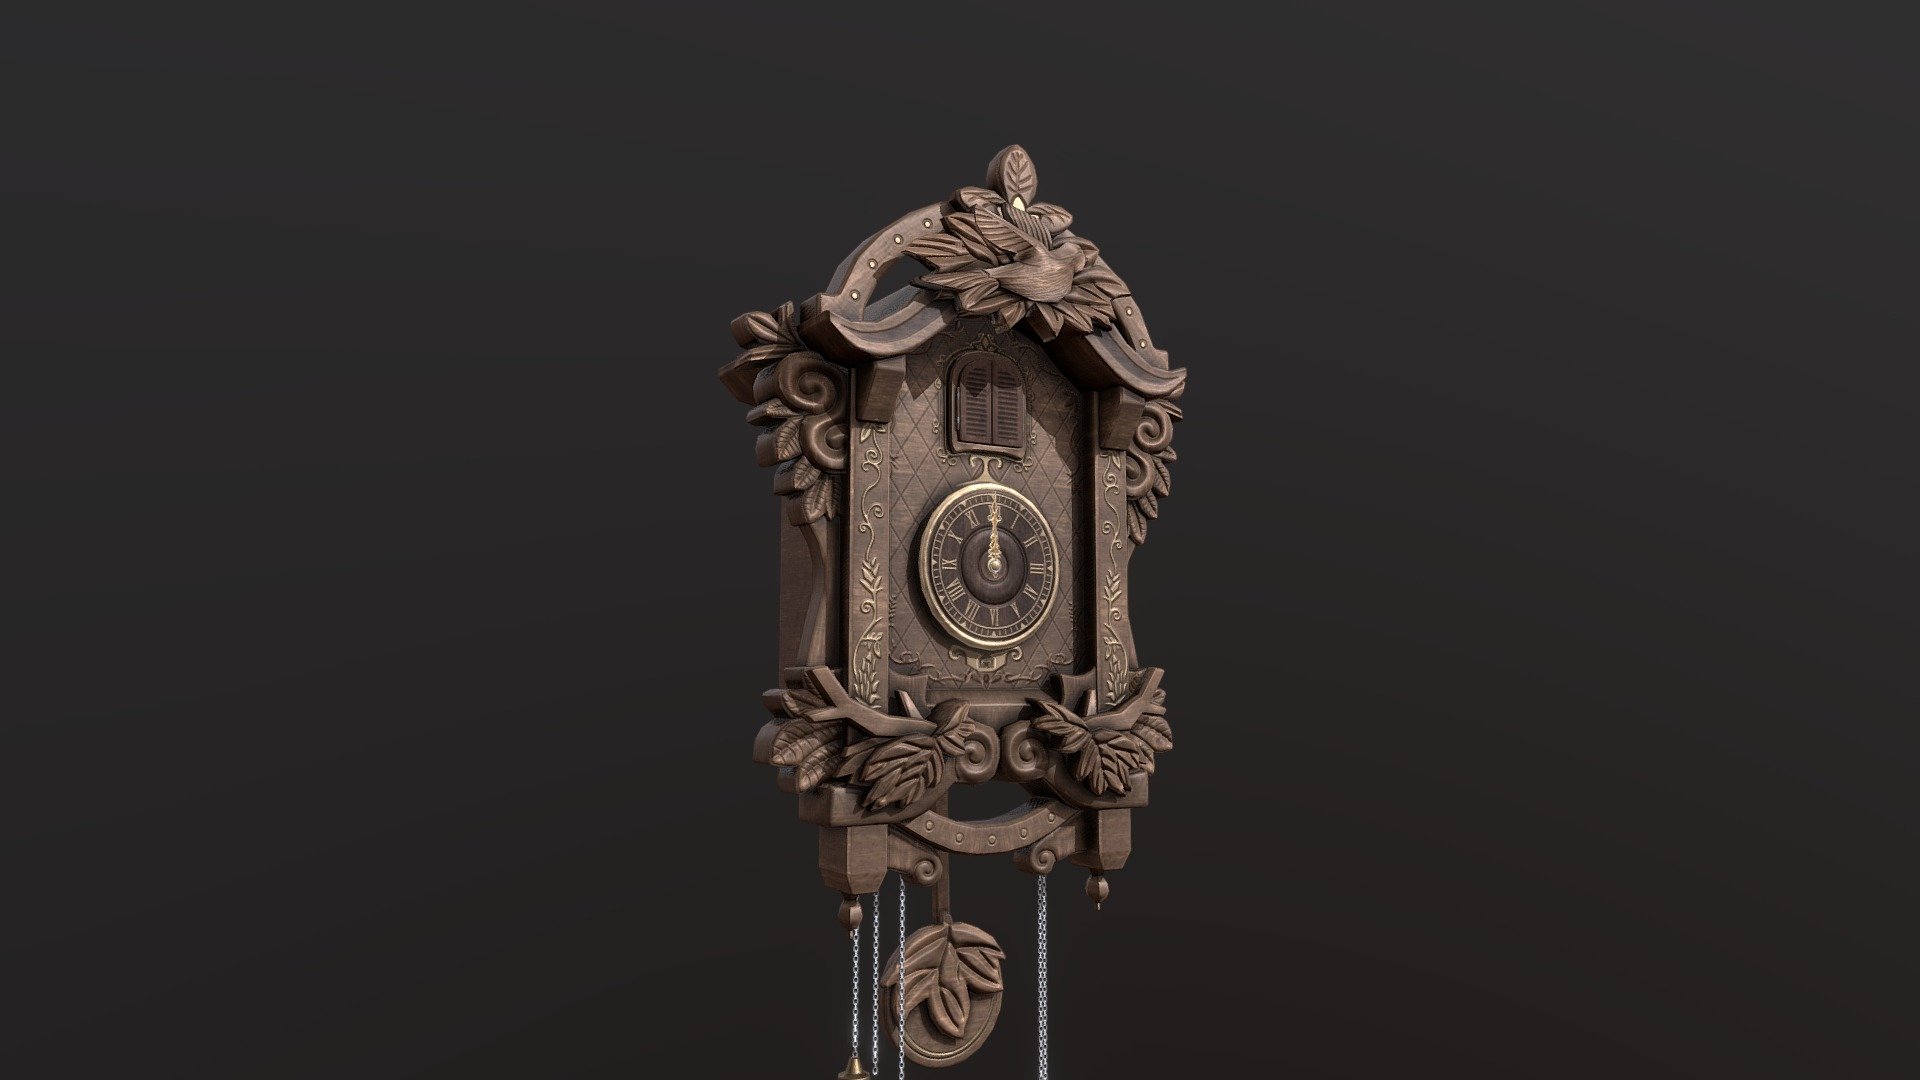 Cuckoo clock with delicate engraving in vintage style.
Wood texture vintage cuckoo clock with two sets of animations:
Pendulum cycle, Cuckoo bird clock strike.

Note: 
It is recommended to use uncompressed textures in the attached file 3d model